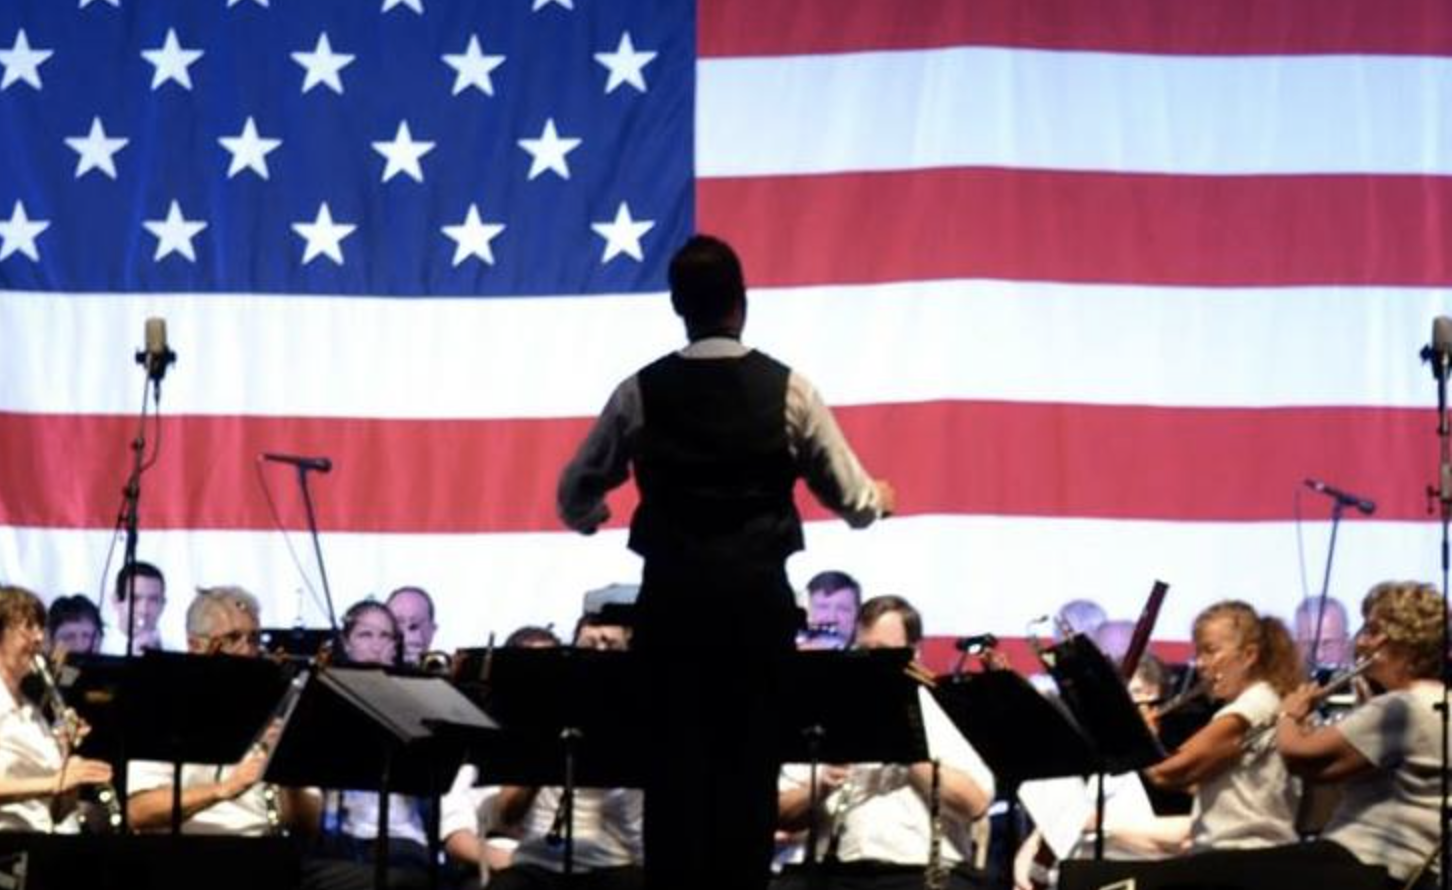 Atlantic Wind Symphony at Patchogue Theatre on Veterans Day Concert Nov 11